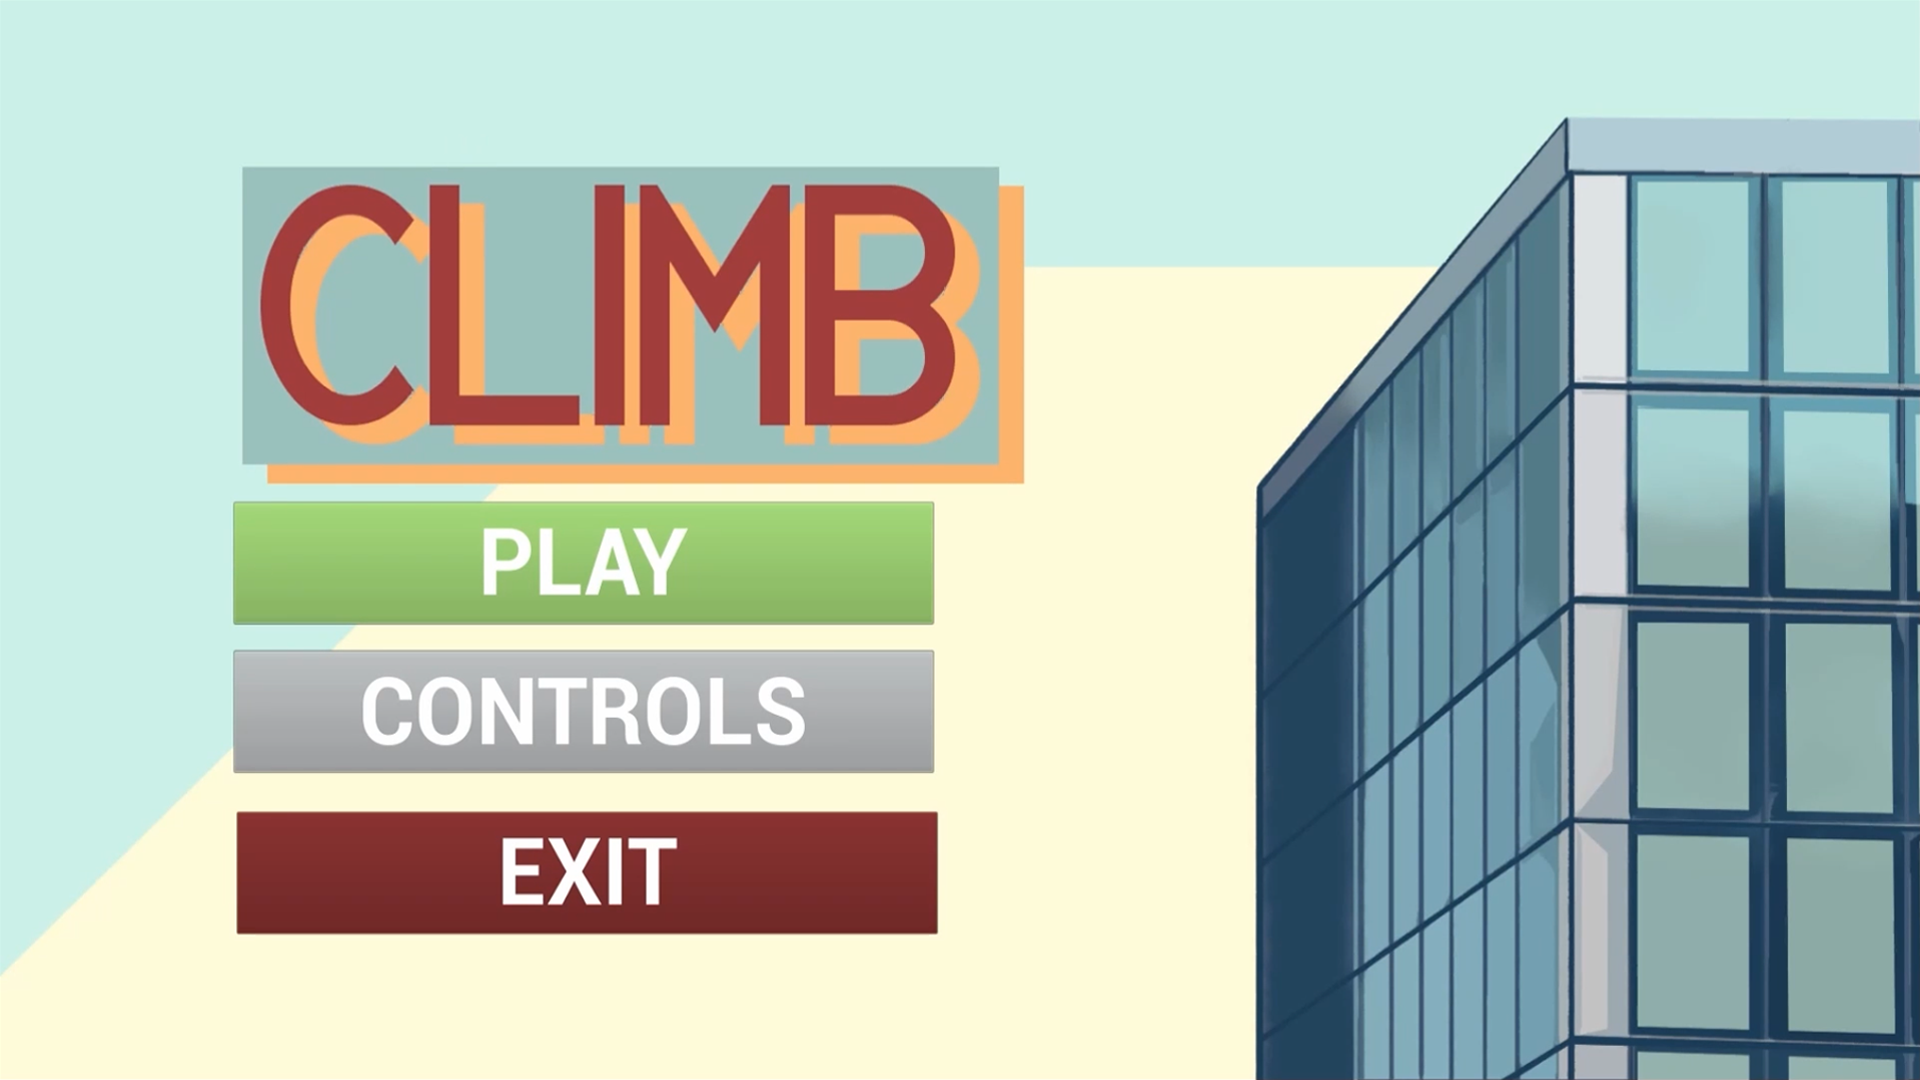 A screenshot of a game title menu for the game Climb linking to a short, edited trailer for the game featuring gameplay.